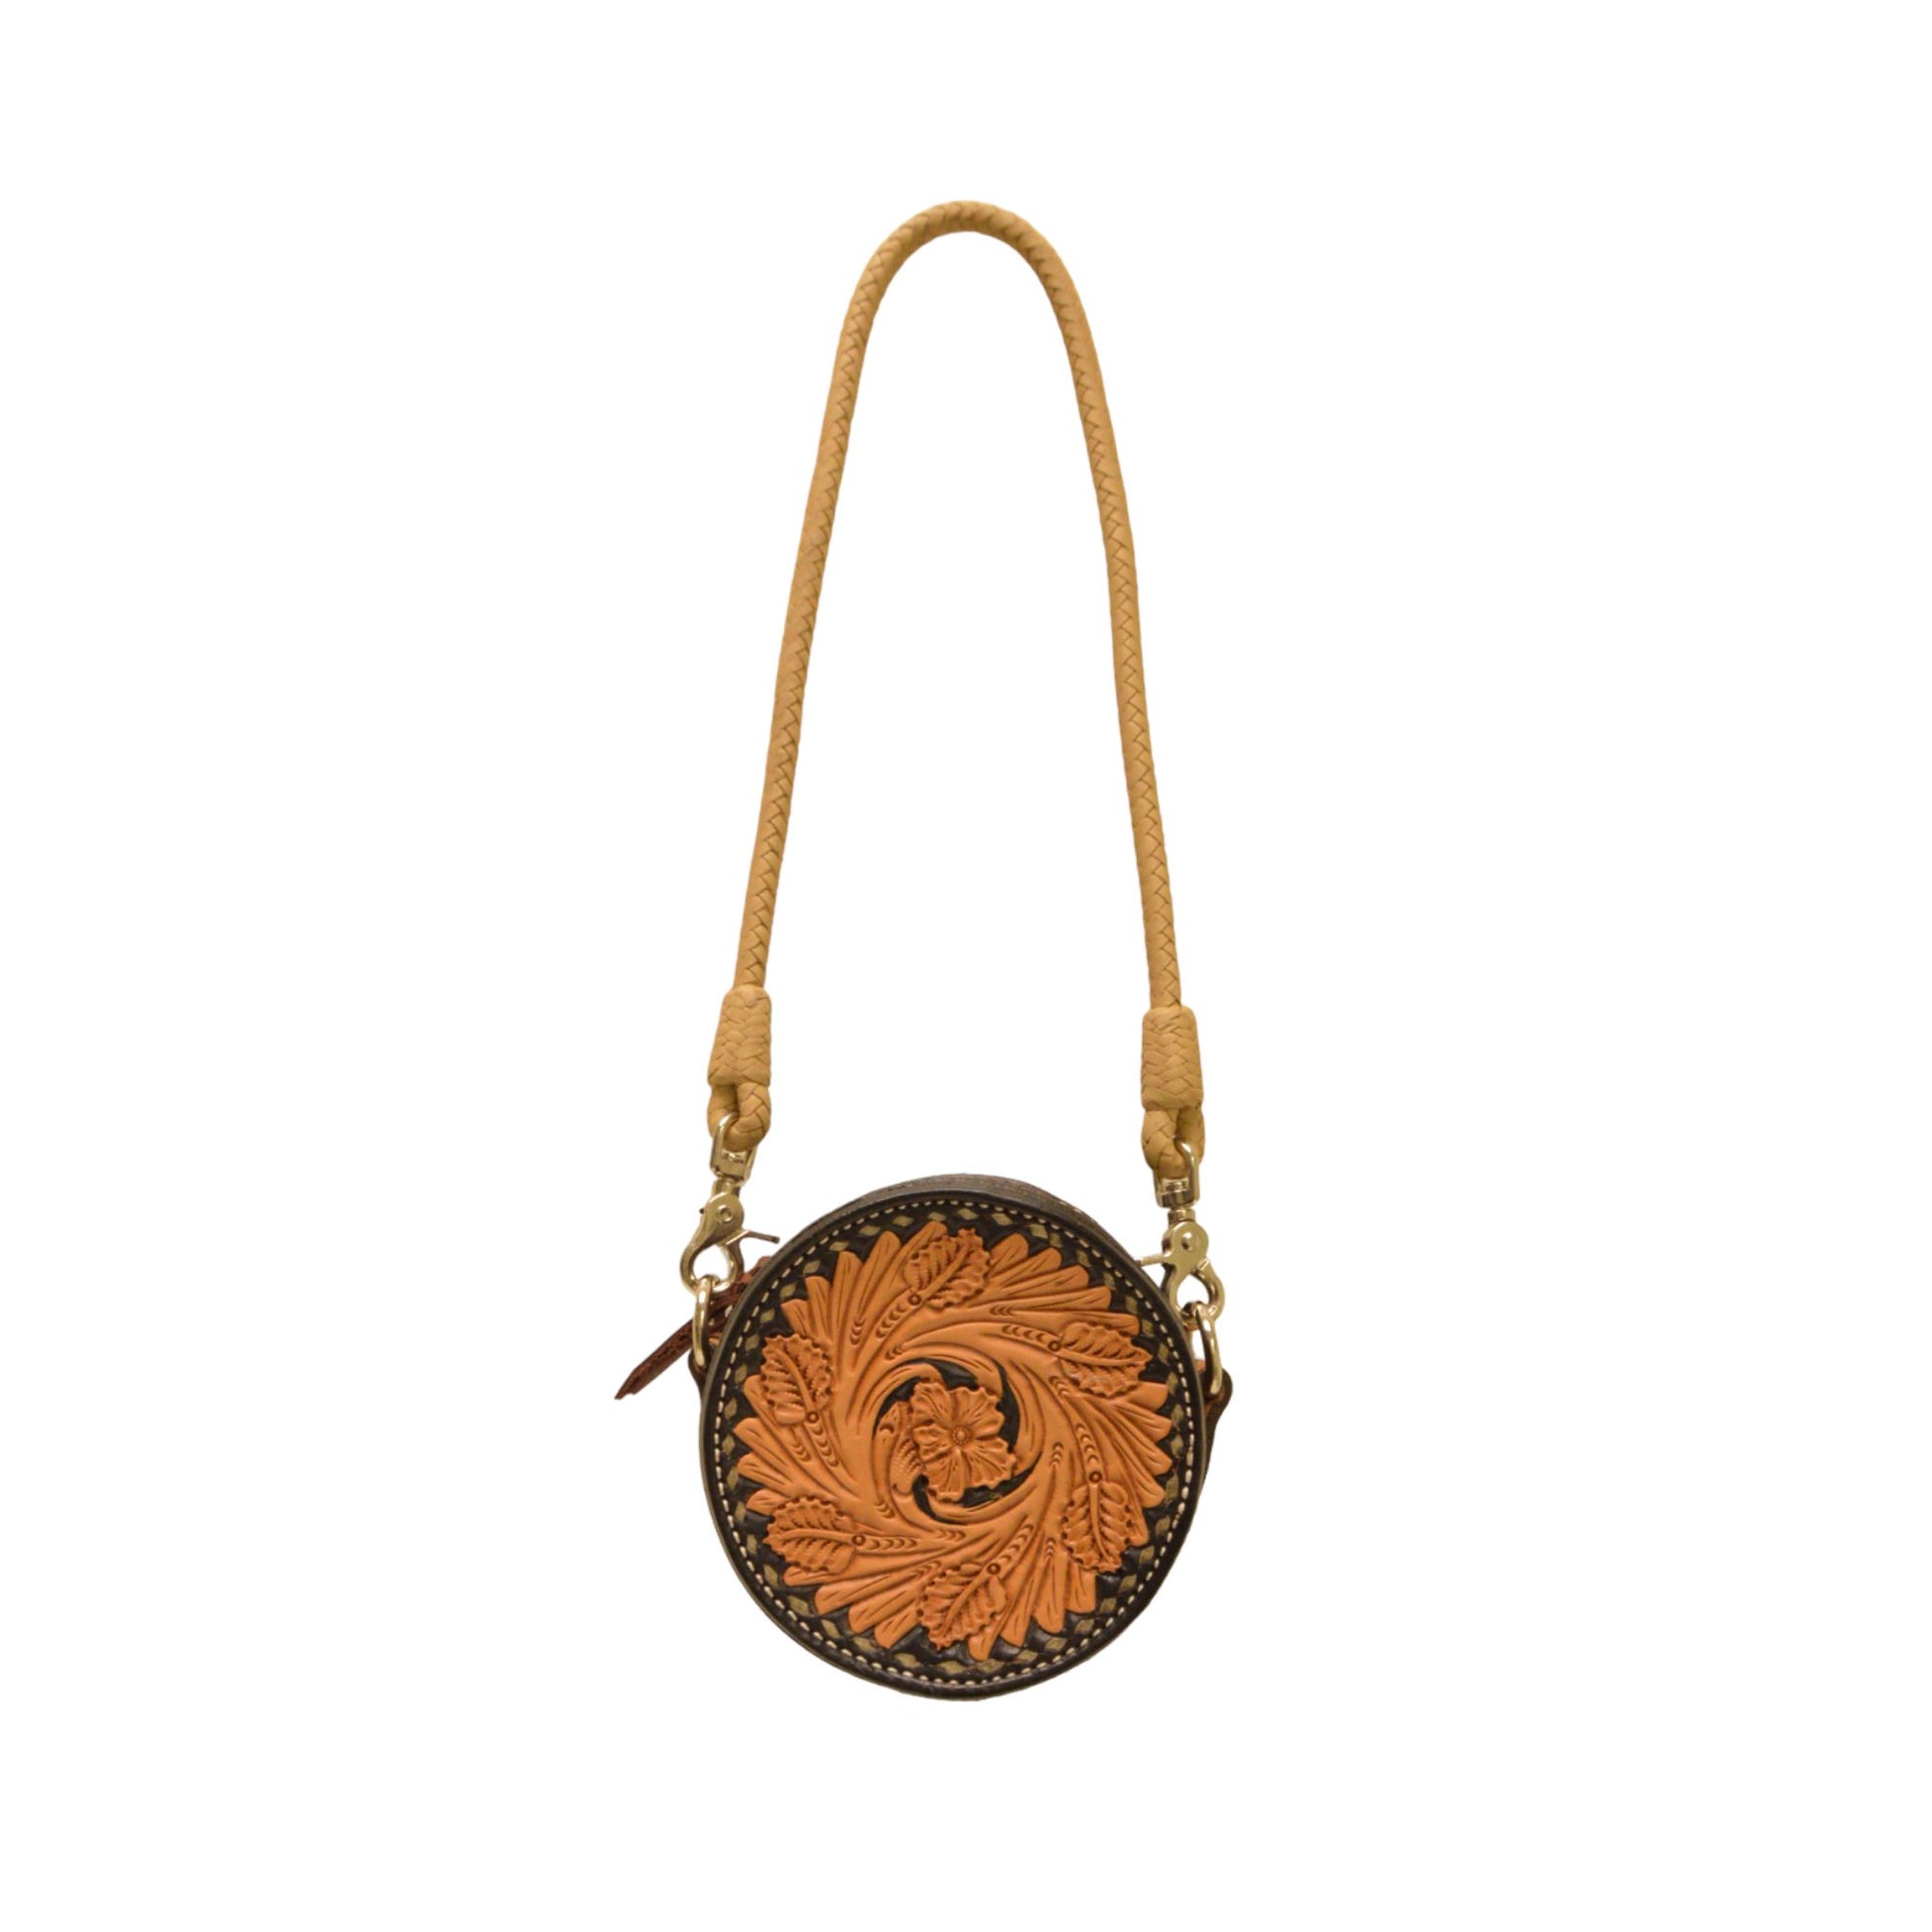 This is our stunning rope can handbag, perfect for any occasion. It's in our golden leather wild rose tooling with a braided strap, rawhide buckstitch, and black paint to the edge. Inside features our vintage metallic overlay with a cardholder. 